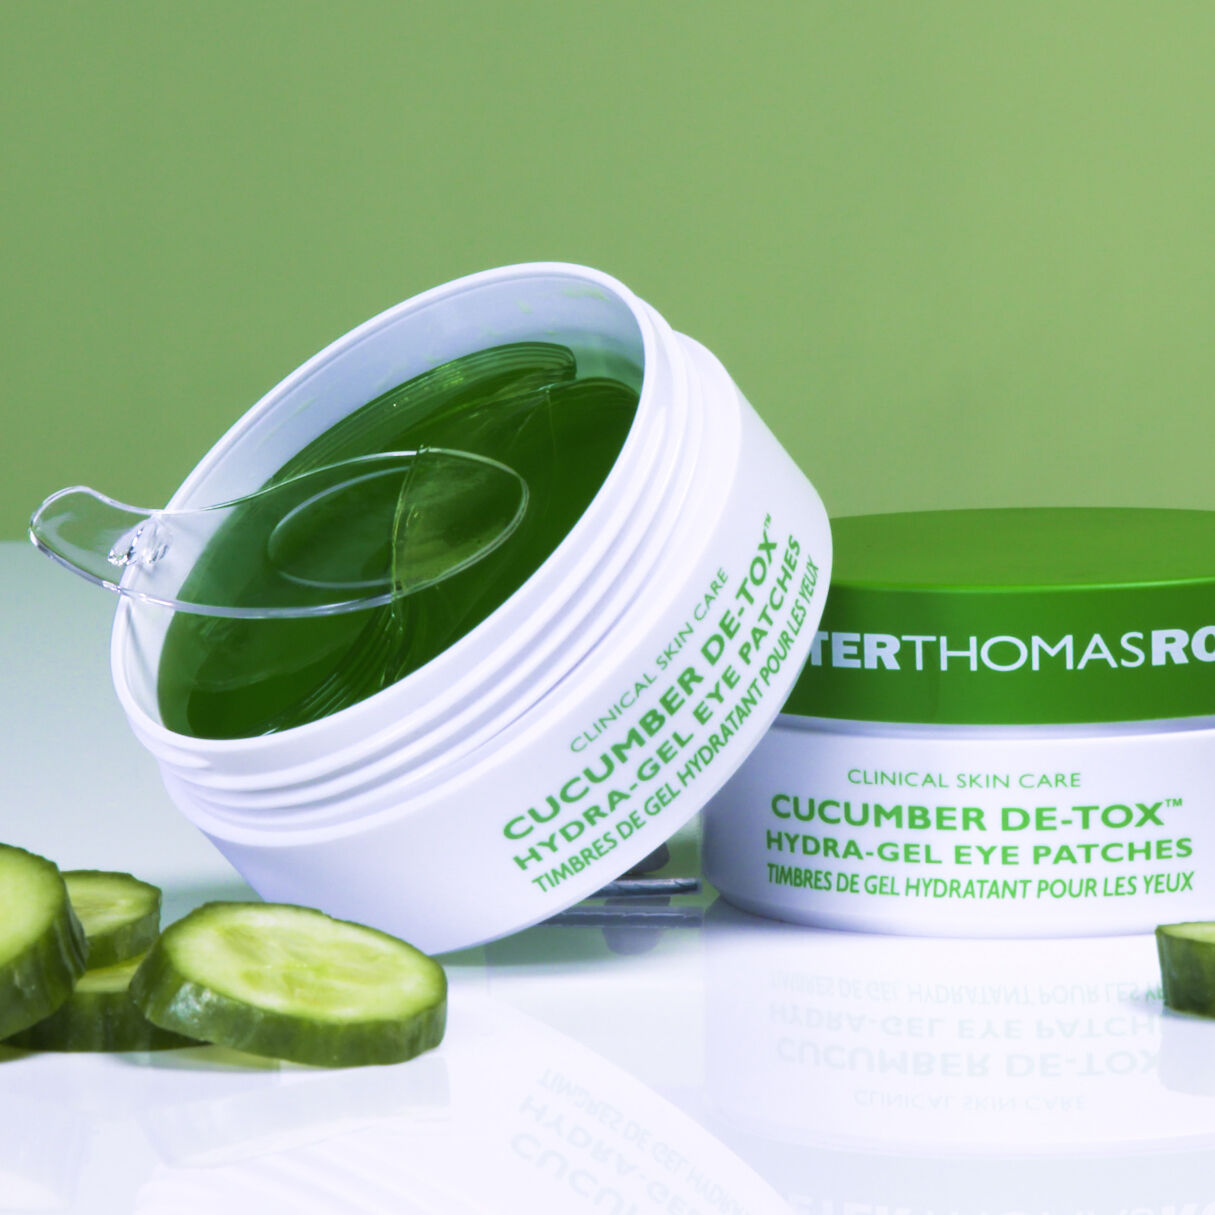 Cucumber De-Tox Hydra-Gel Eye Patches | Peter Thomas Roth